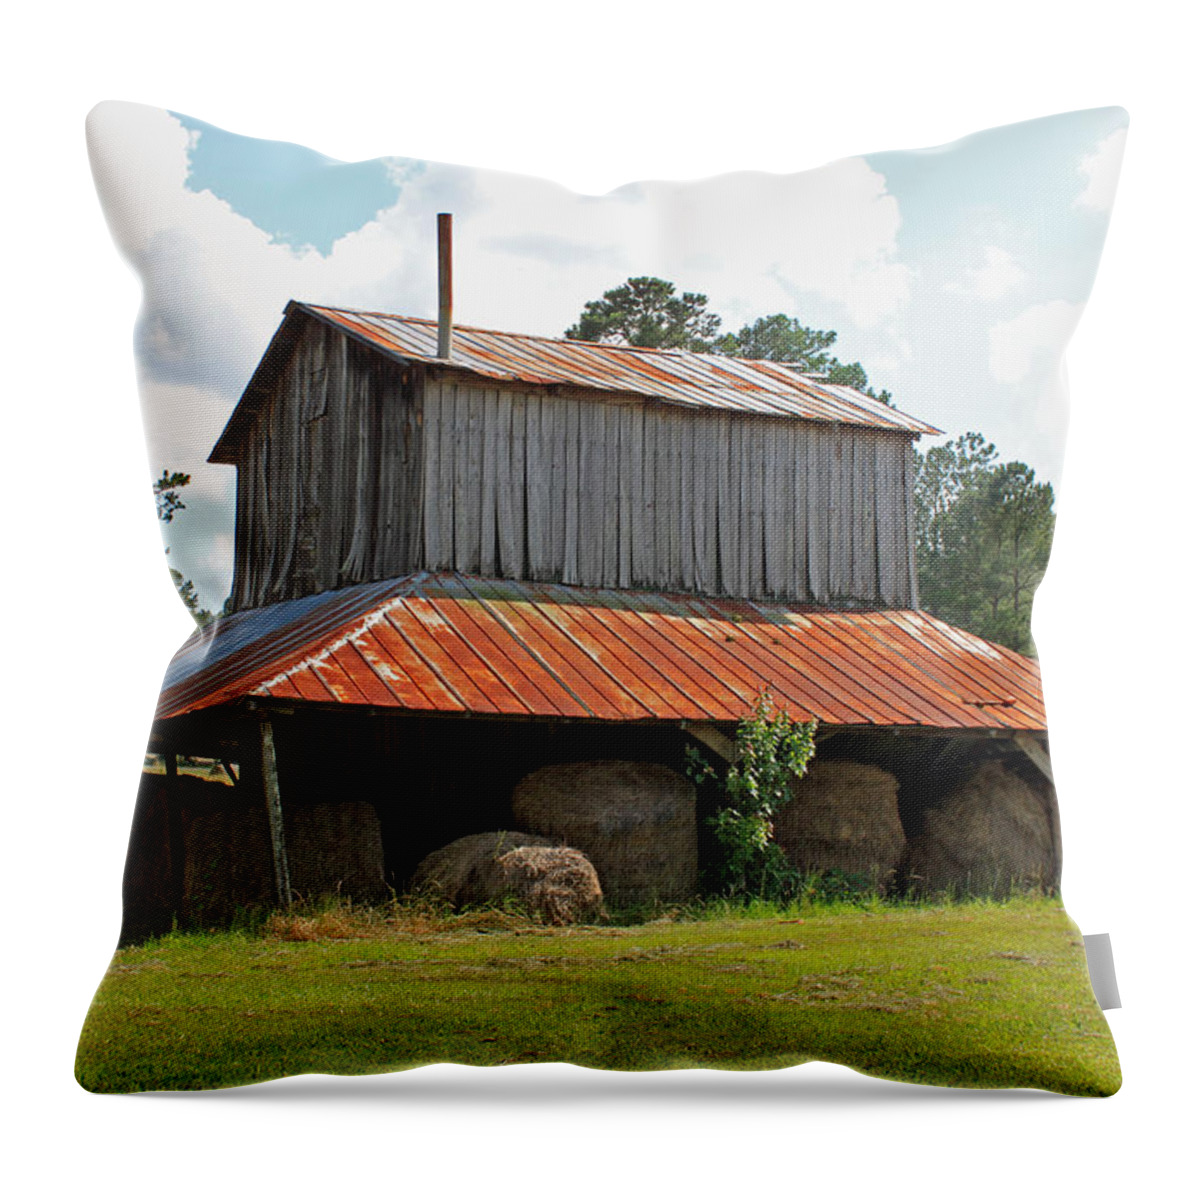 Tobacco Barn Throw Pillow featuring the photograph Clewis Family Tobacco Barn by Suzanne Gaff